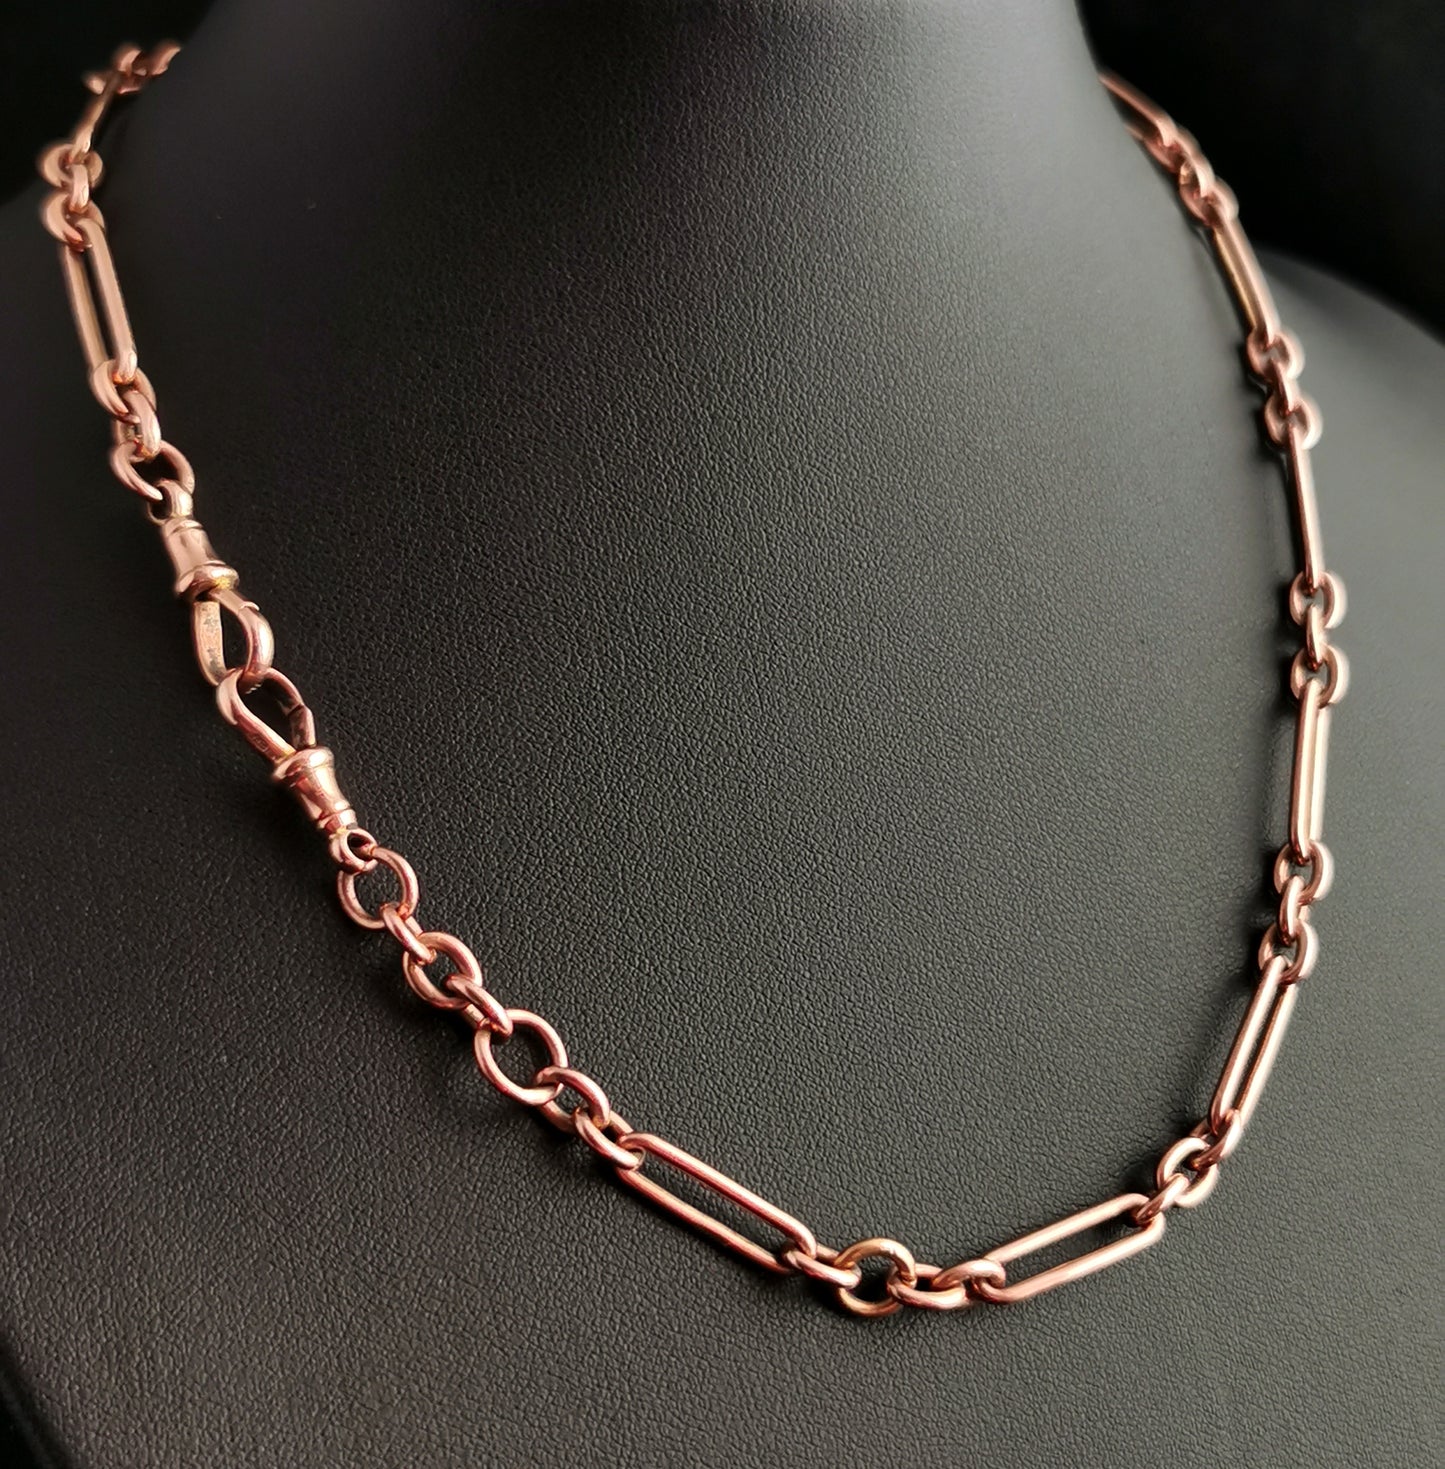 Antique 9ct Rose gold Albert chain, watch chain necklace, Trombone link